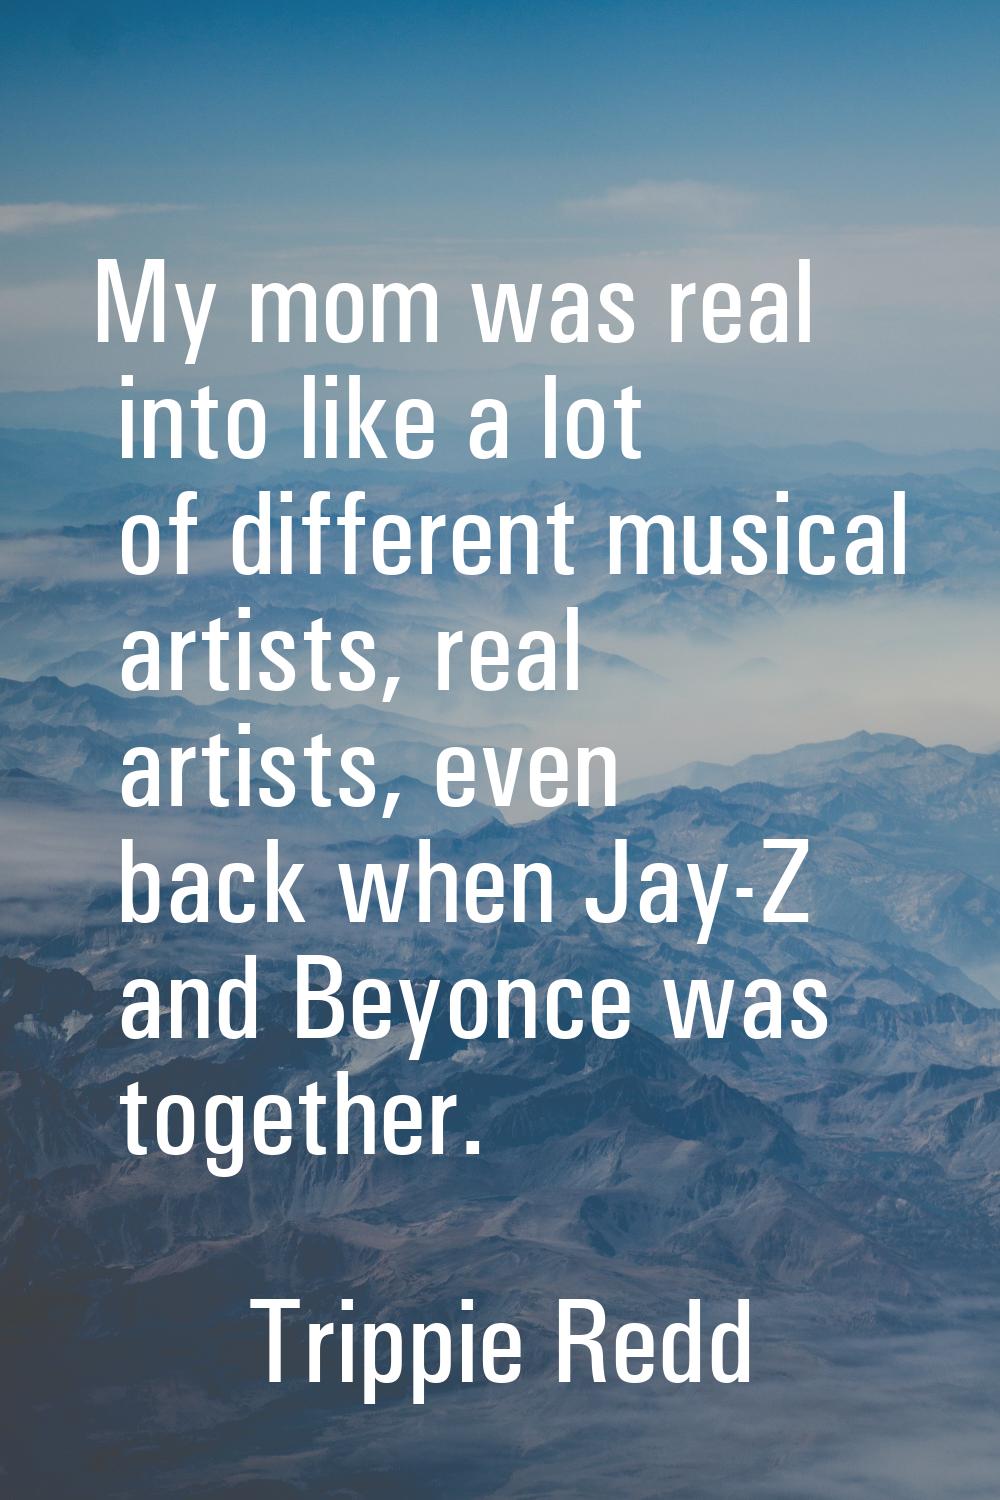 My mom was real into like a lot of different musical artists, real artists, even back when Jay-Z an